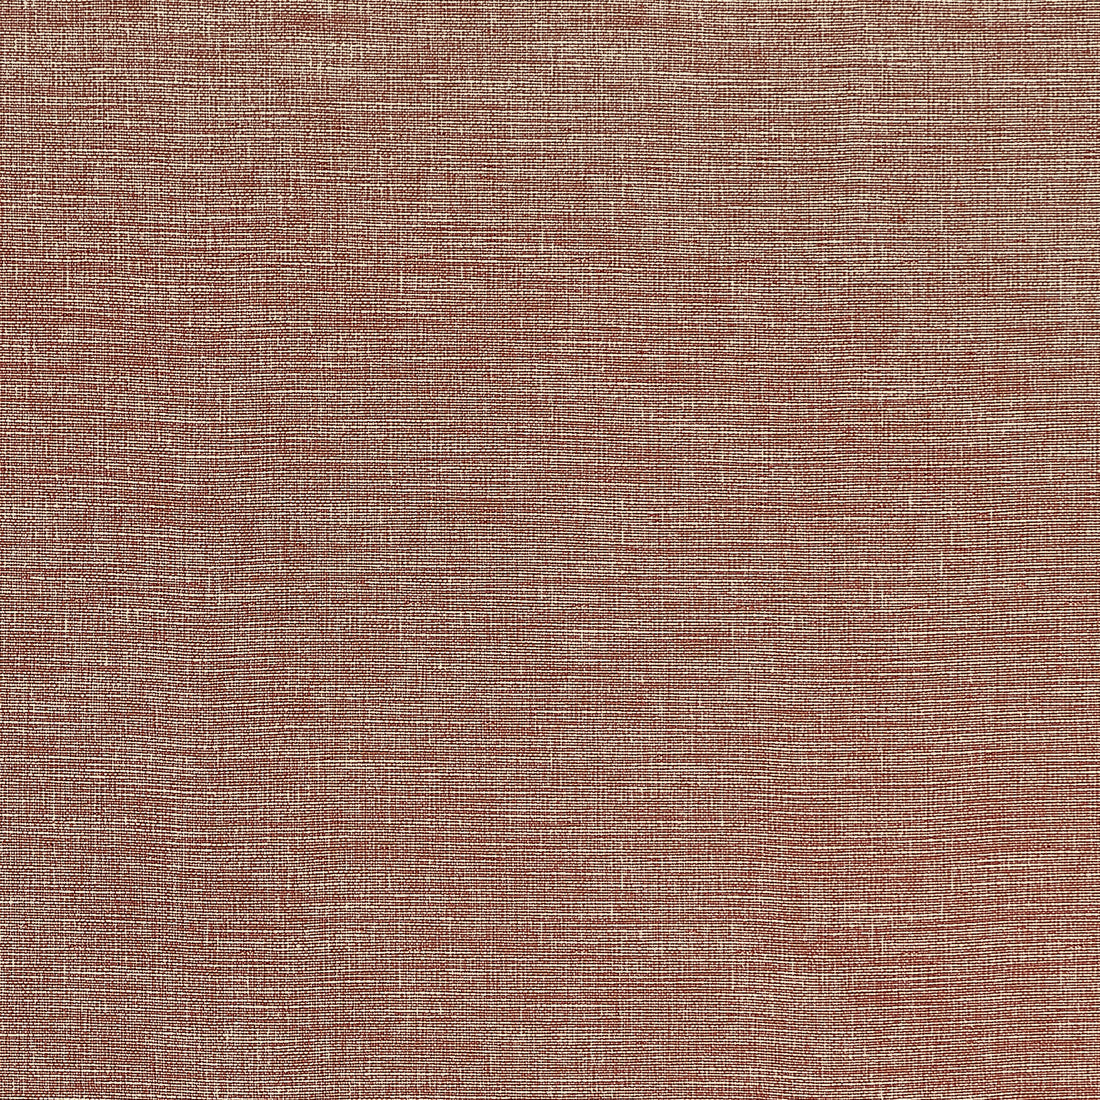 Finley fabric in russet color - pattern number W81614 - by Thibaut in the Locale collection